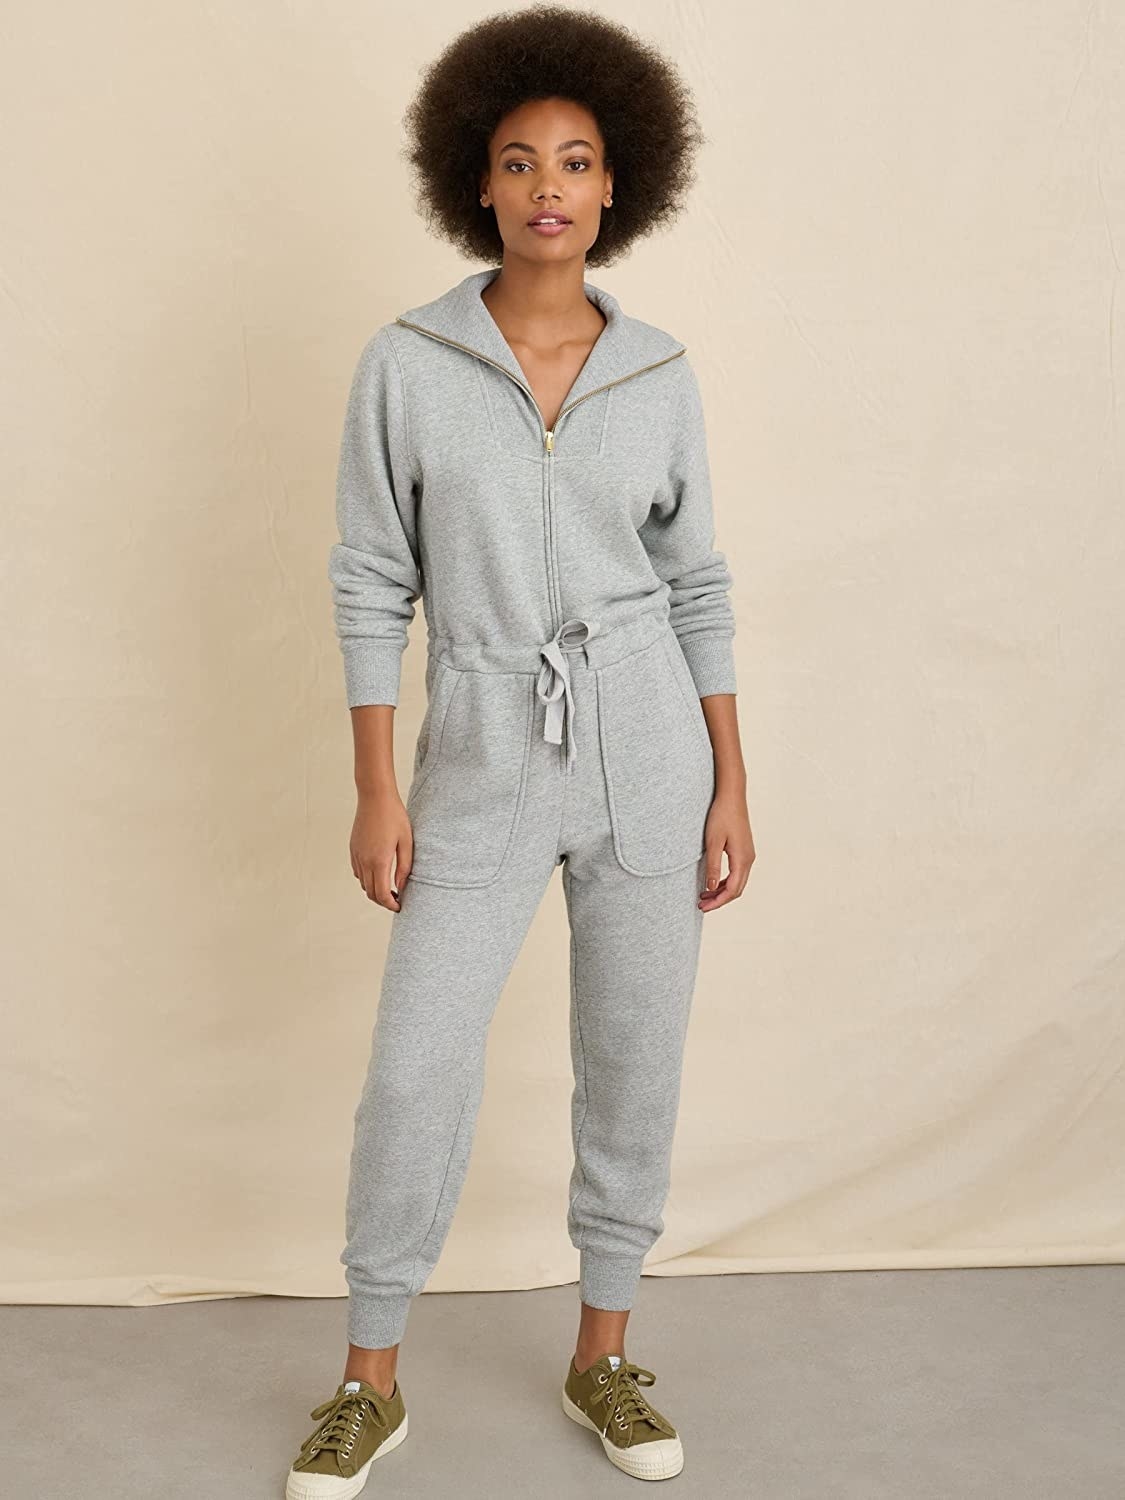 A model in the grey jumpsuit with drawstring waist and side pockets